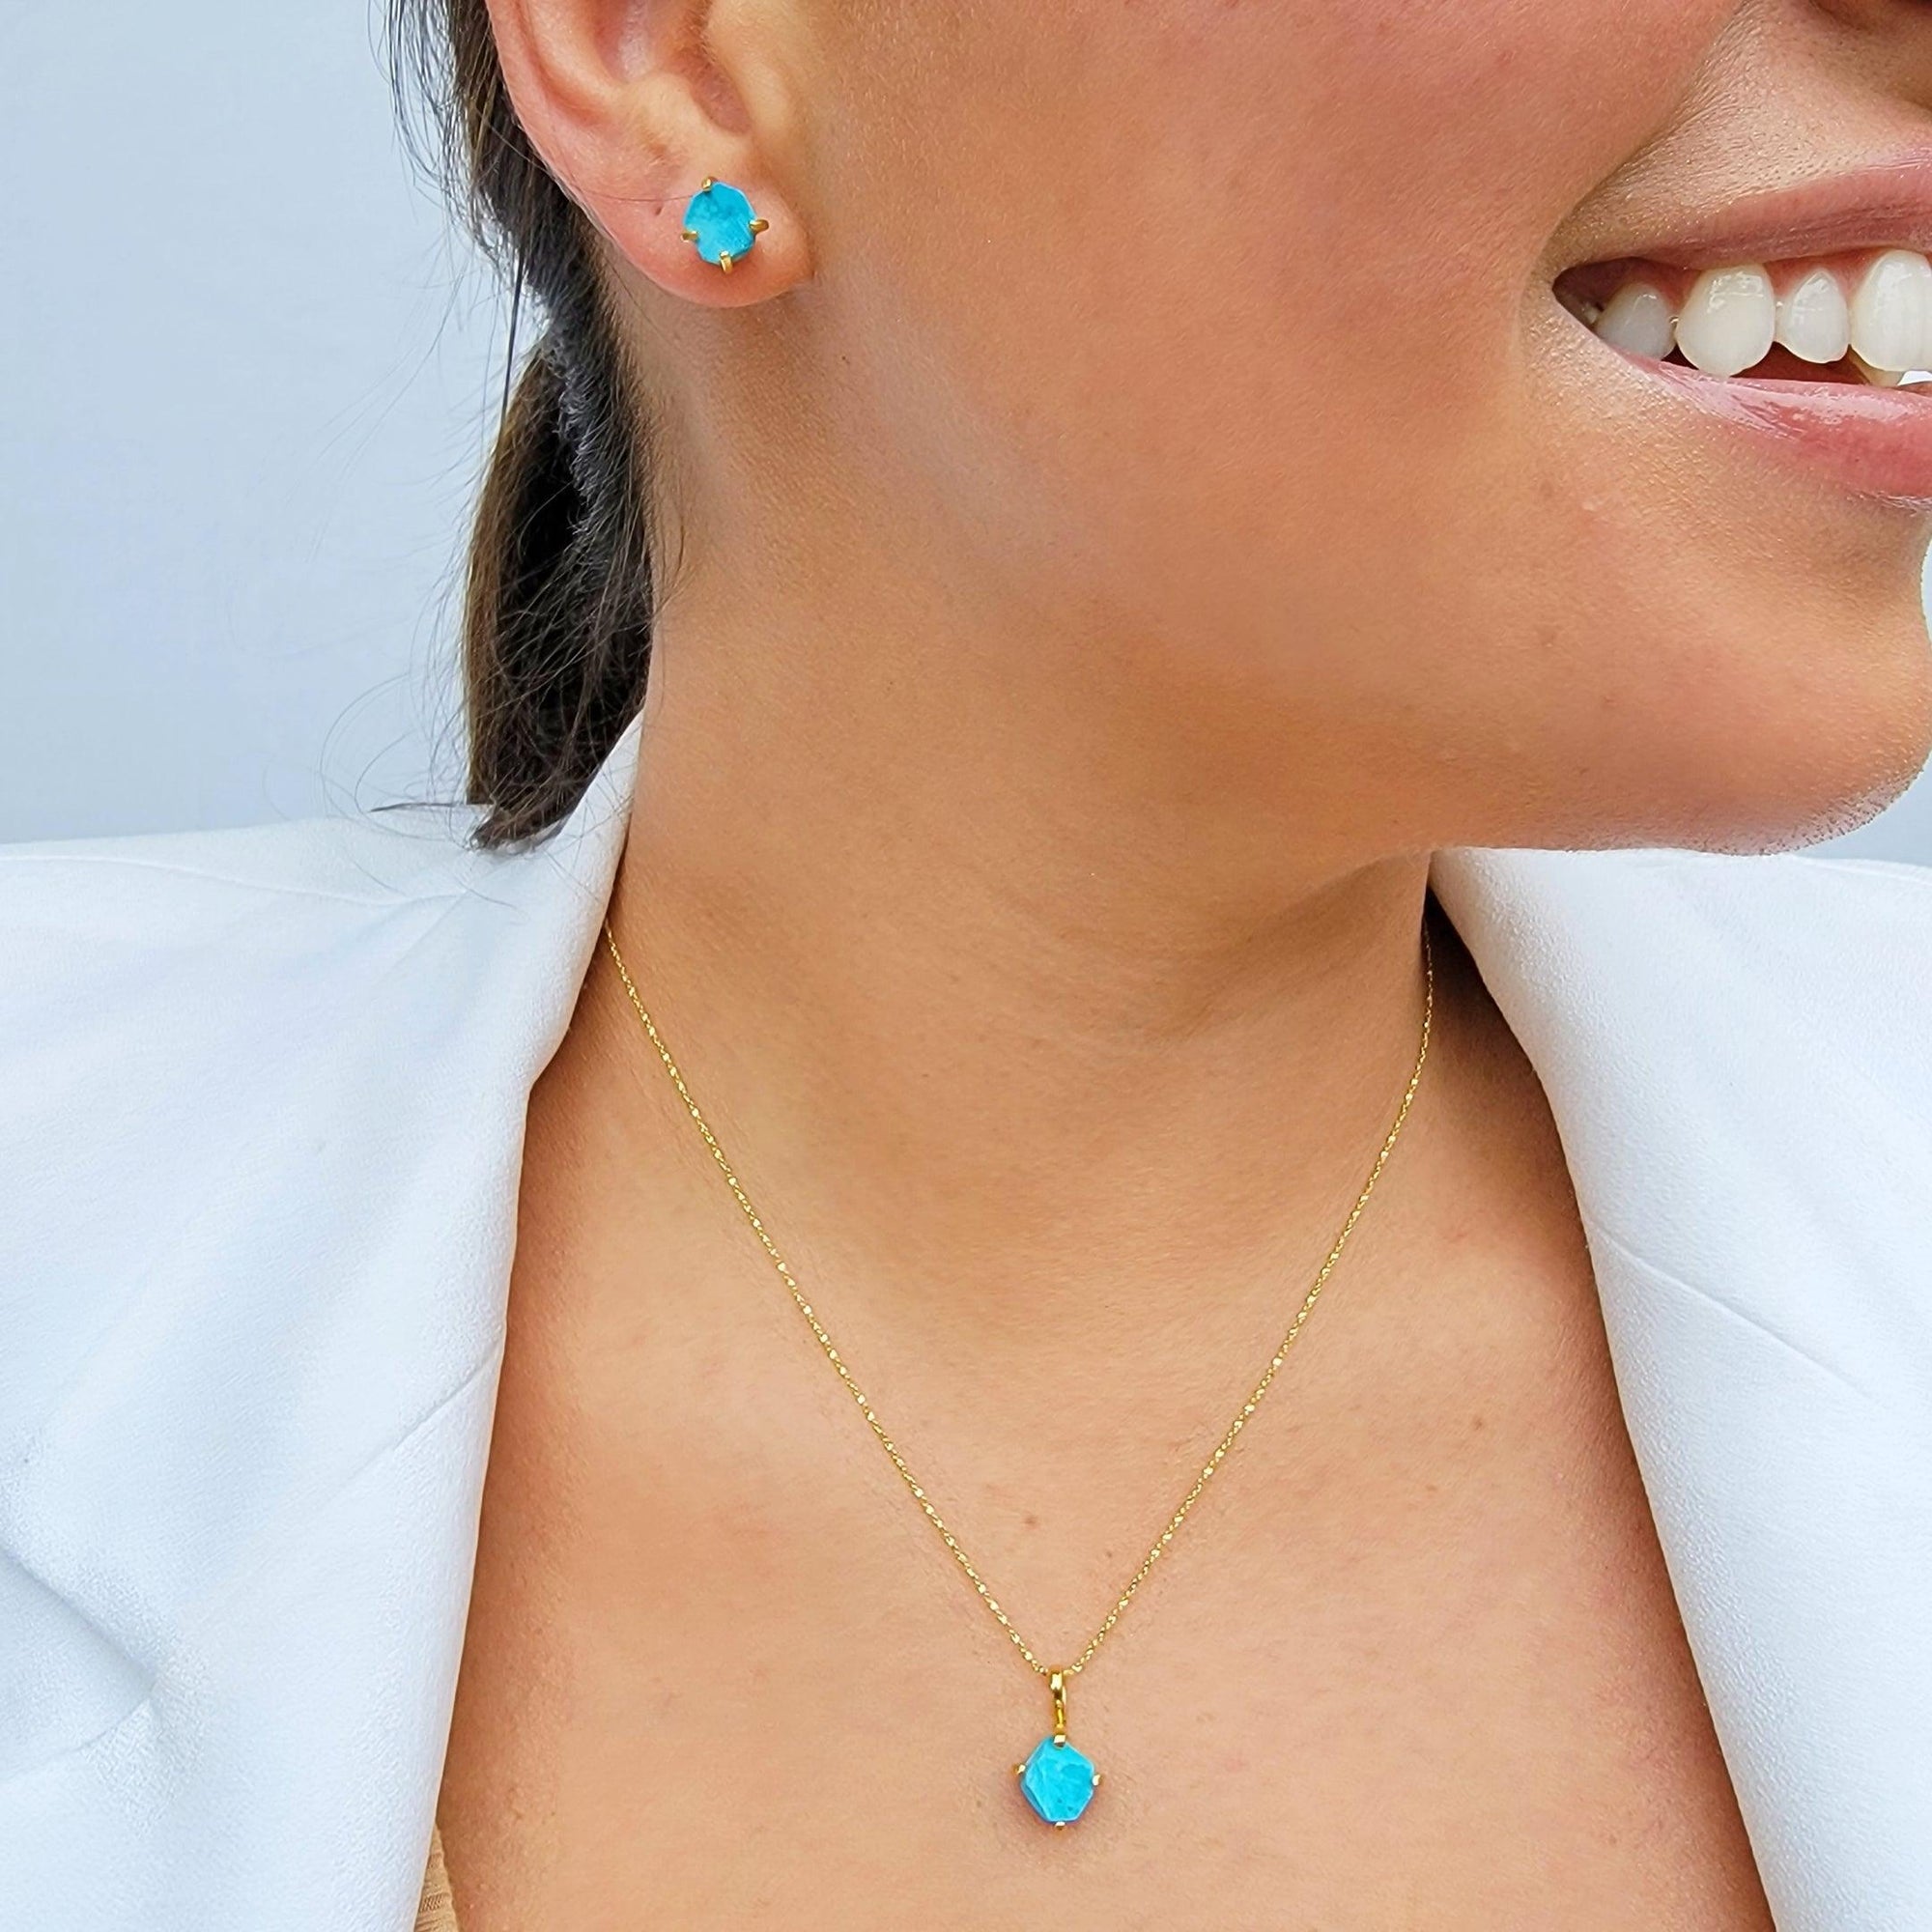 Raw Turquoise Necklace and Stud Earrings Set - Uniquelan Jewelry